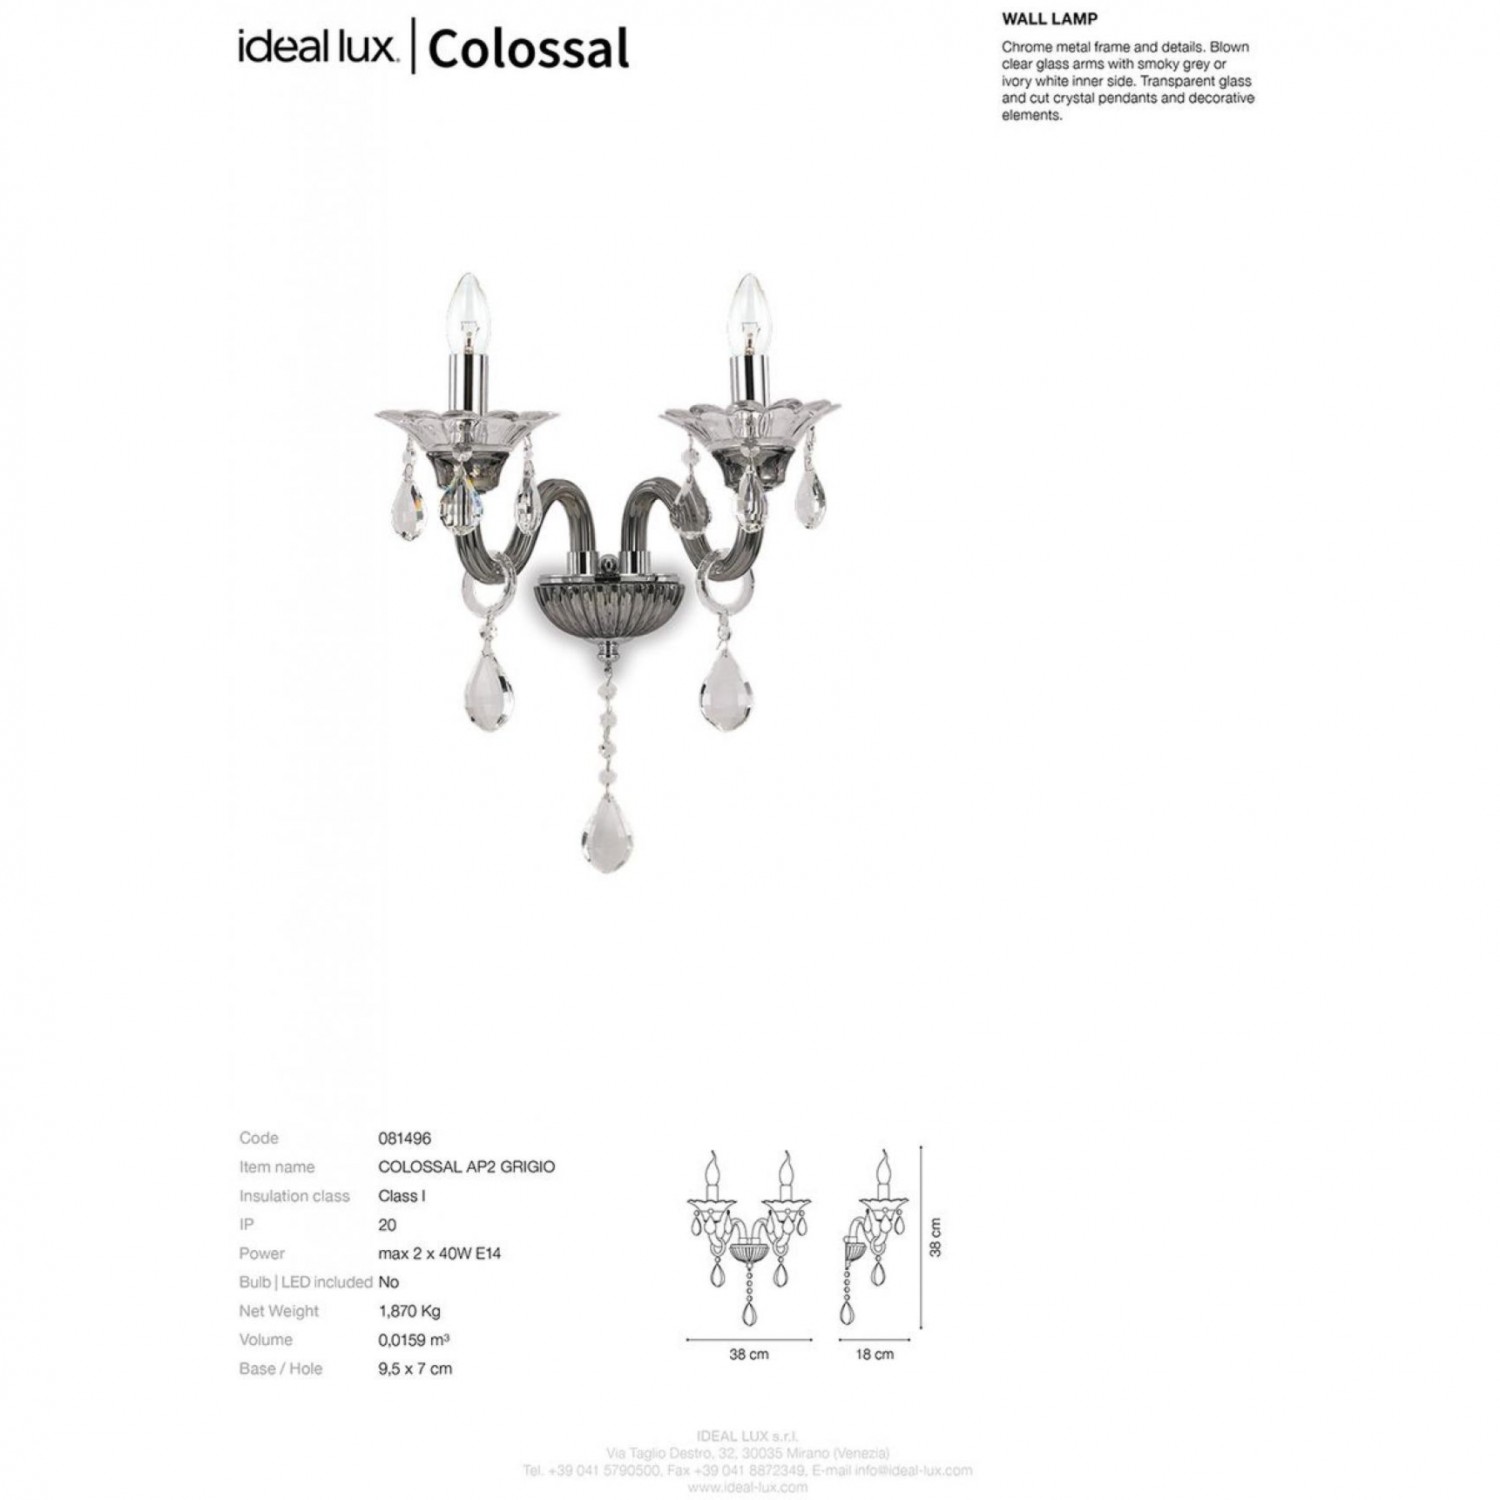 Бра Ideal Lux COLOSSAL AP2 AVORIO 081533